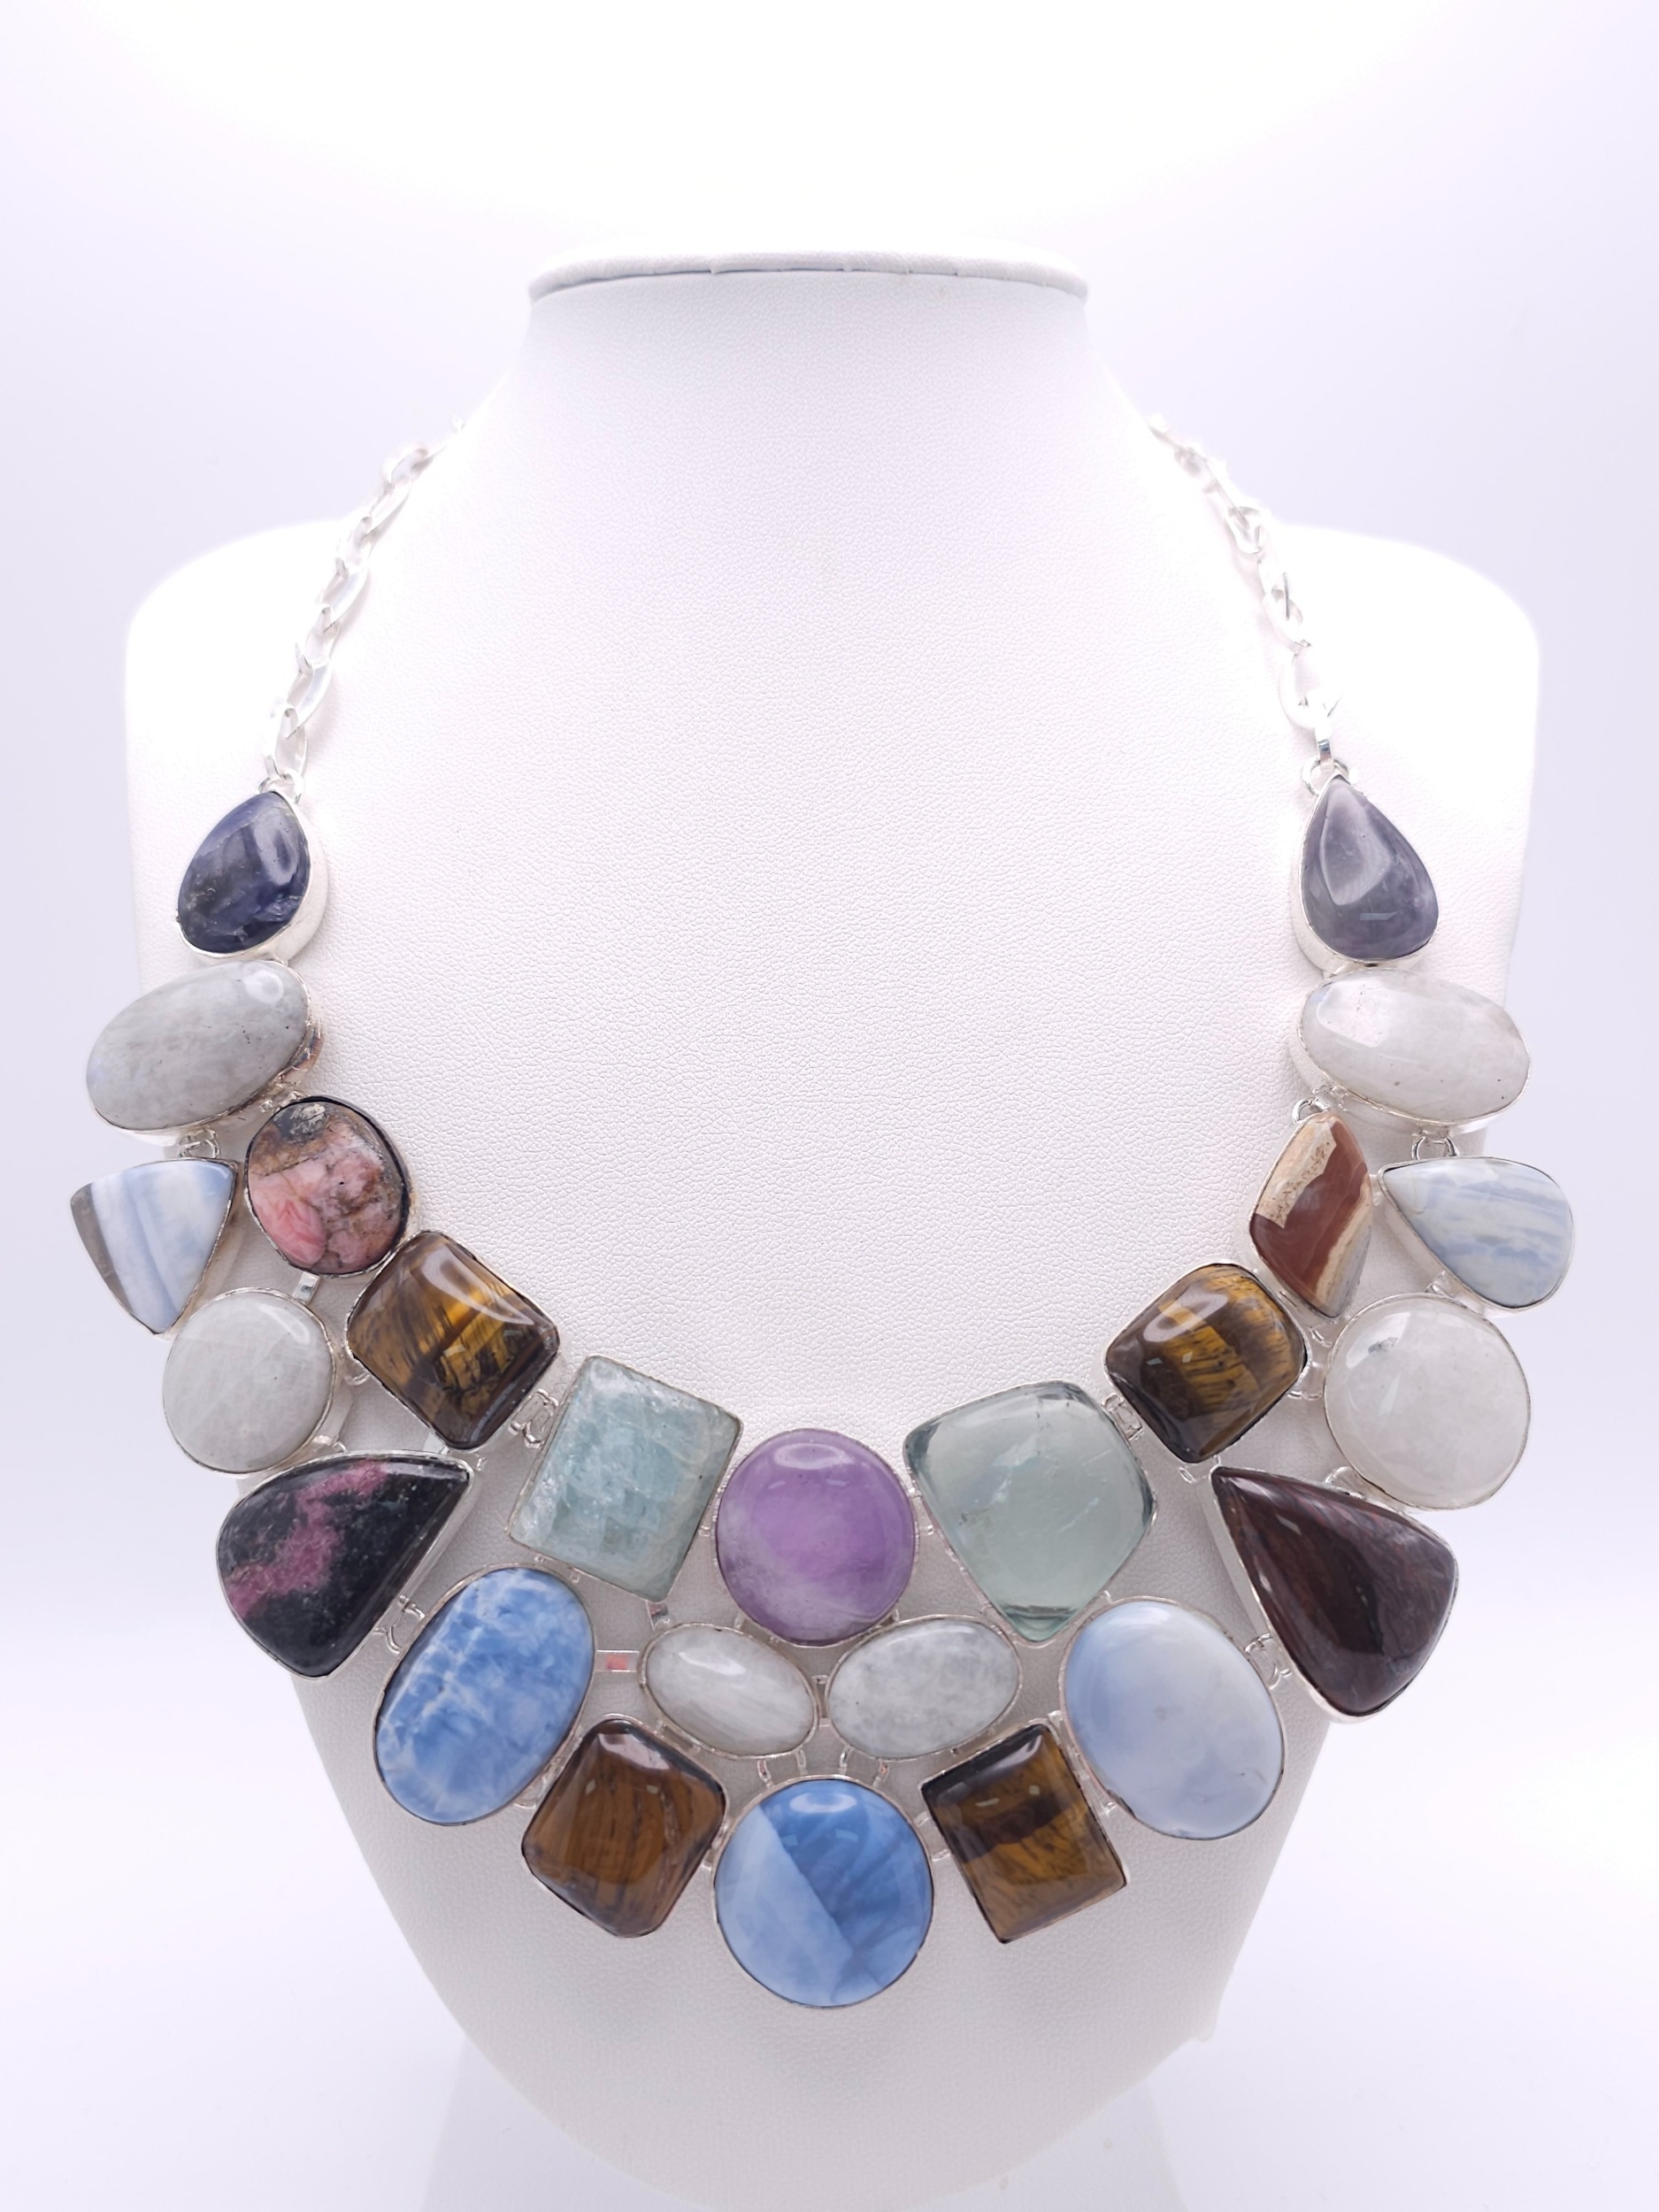 A Multi Gemstone 925 Silver Bracelet - 17cm, and Necklace - 42cm. Also comes with a pair of earrings - Image 5 of 8